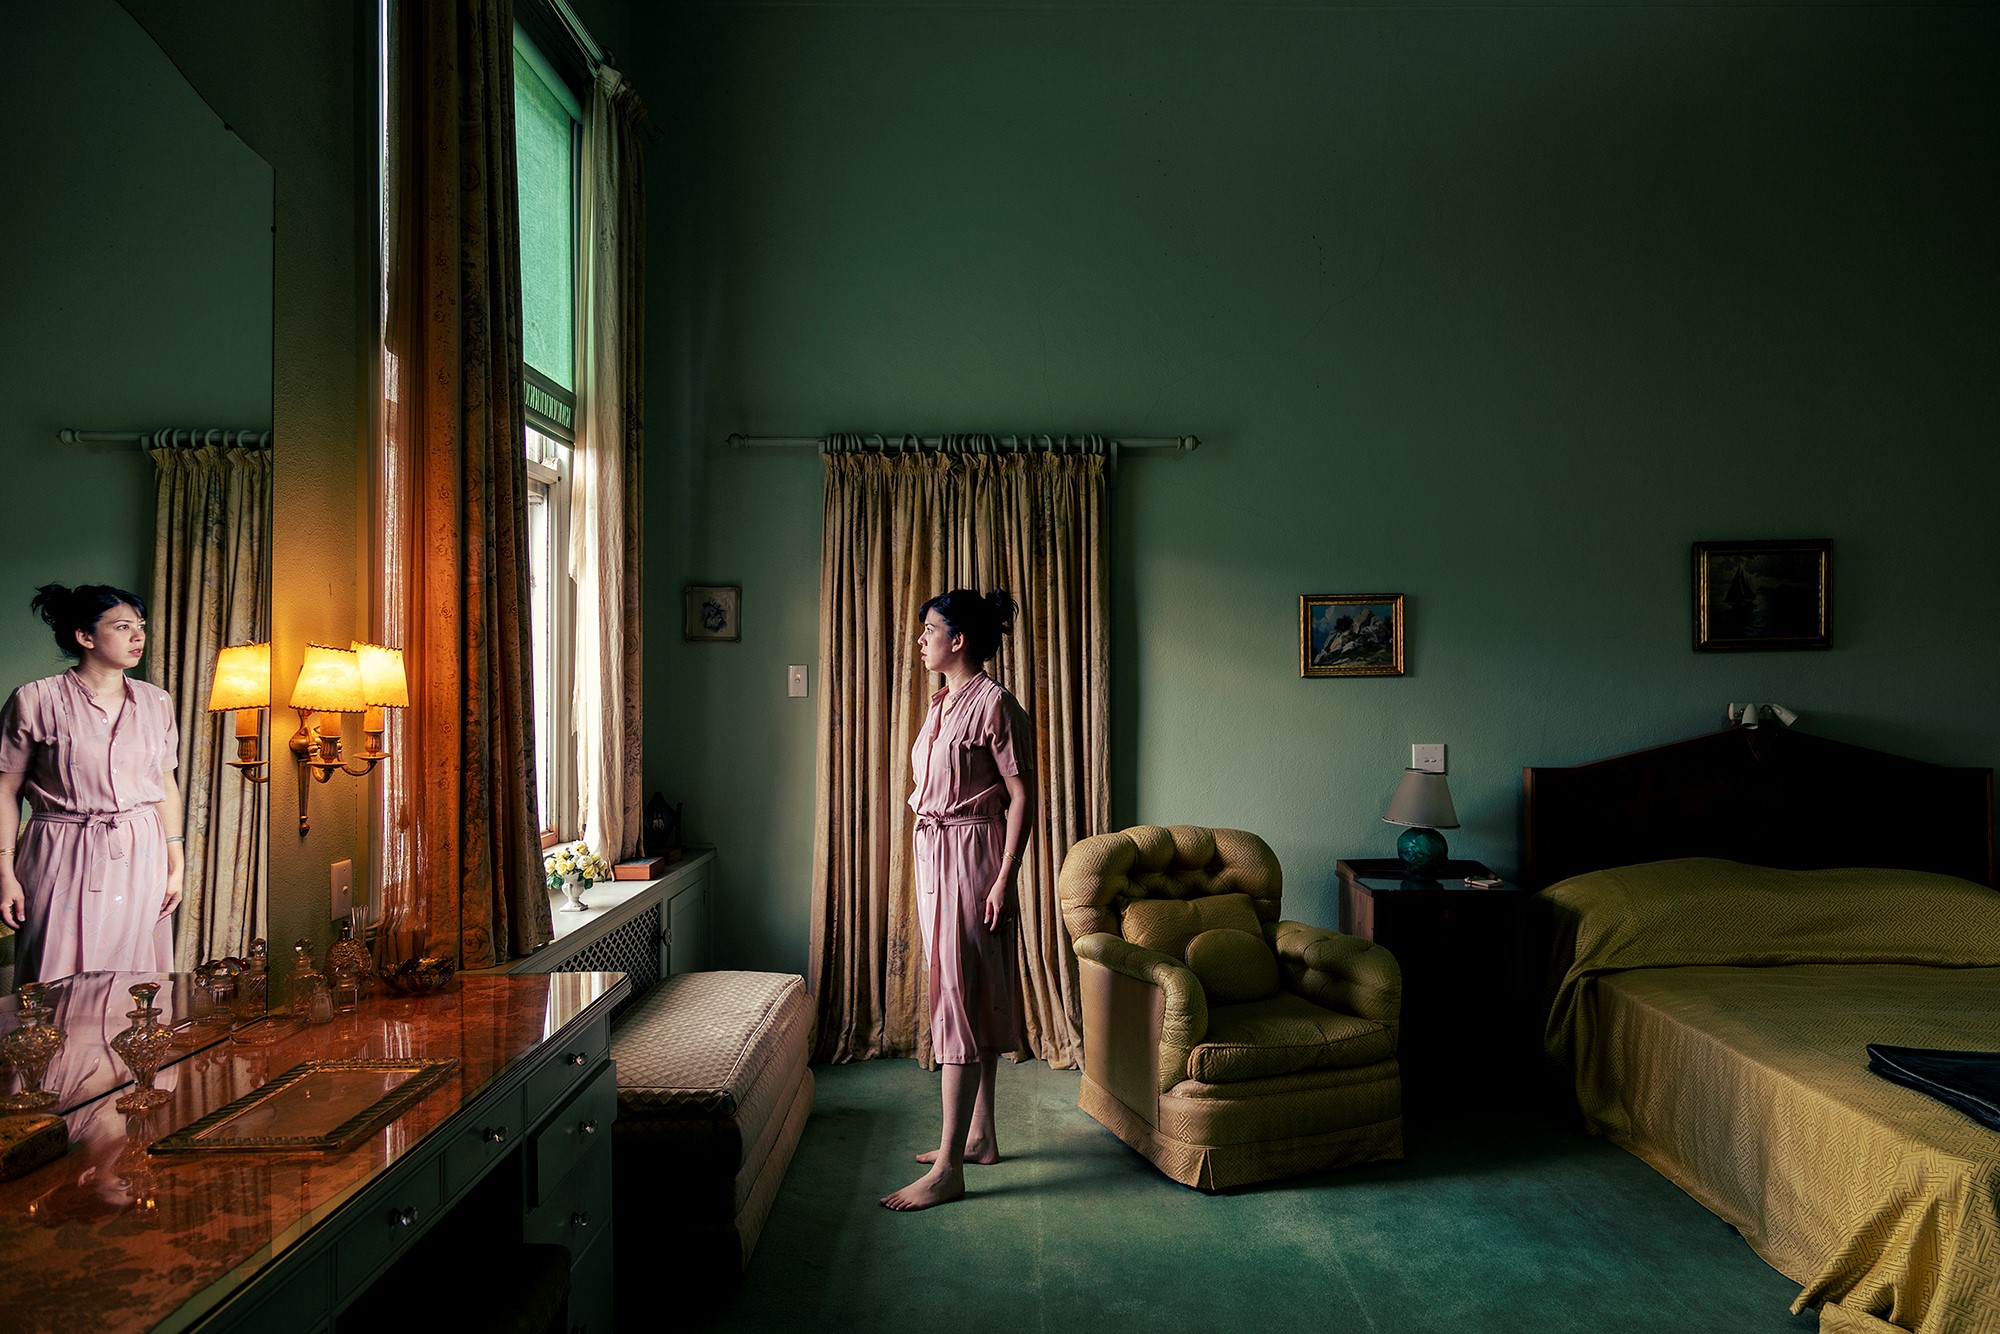 Pia Johnson's artwork 'A view of the pool' from Mooramong Green series, 2020, Archival inkjet print. A woman stands before an open bedroom window and gazes out, her reflection appears in a mirror in the foreground of the image. 